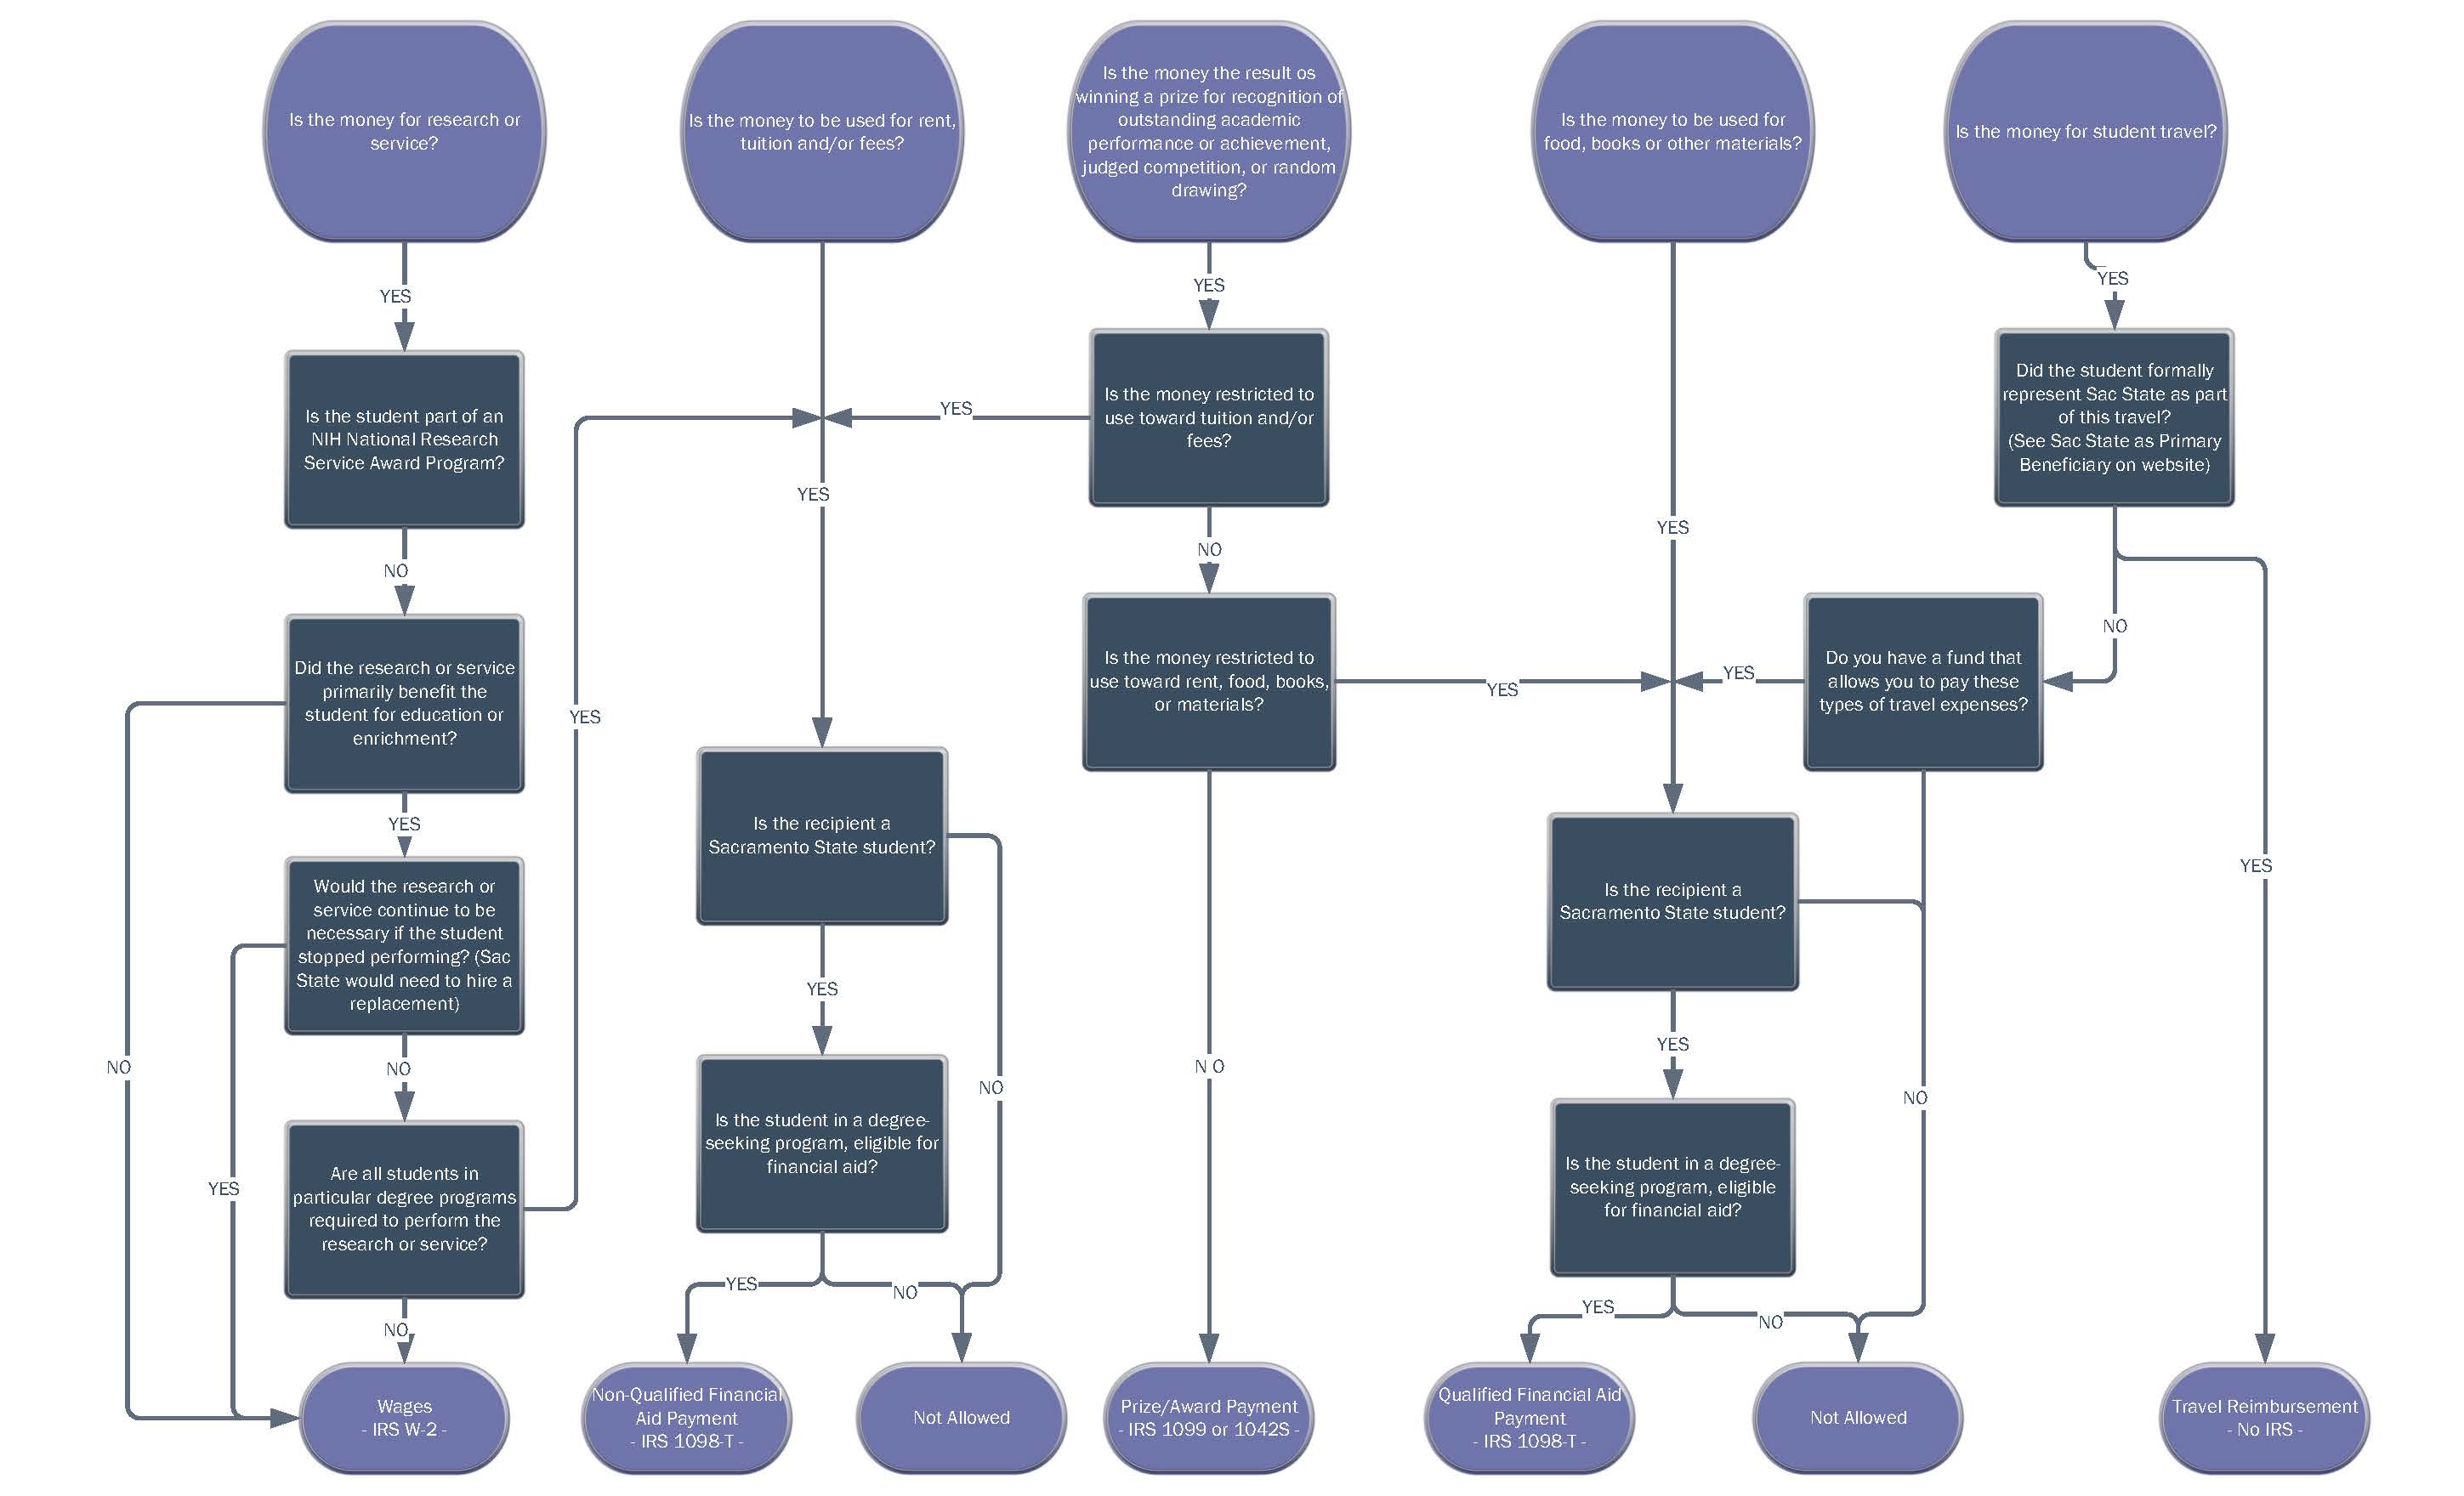 Payments to Students Decision Tree